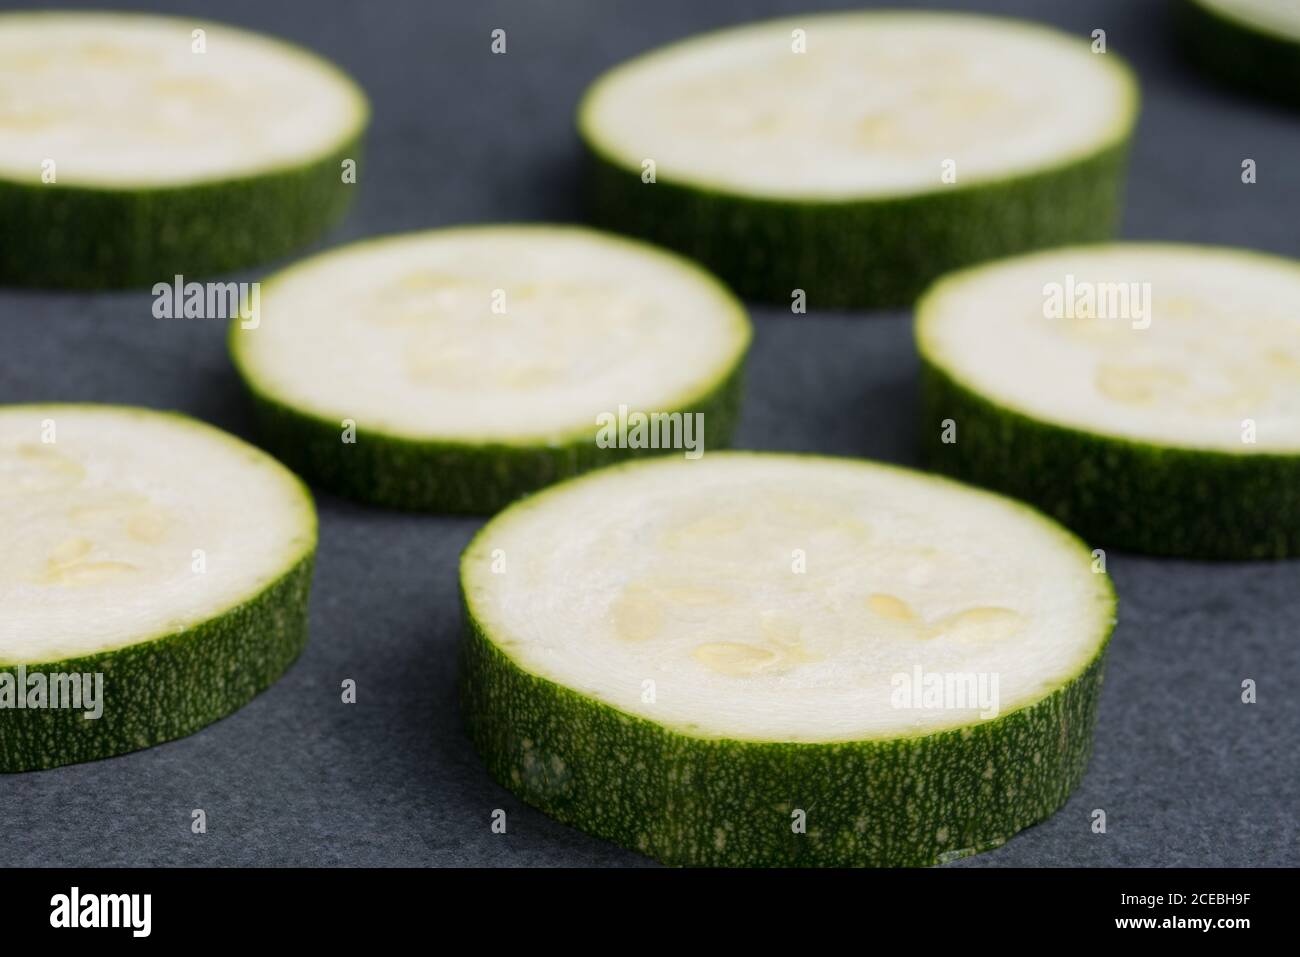 group of green zucchini slices closeup selective focus Stock Photo